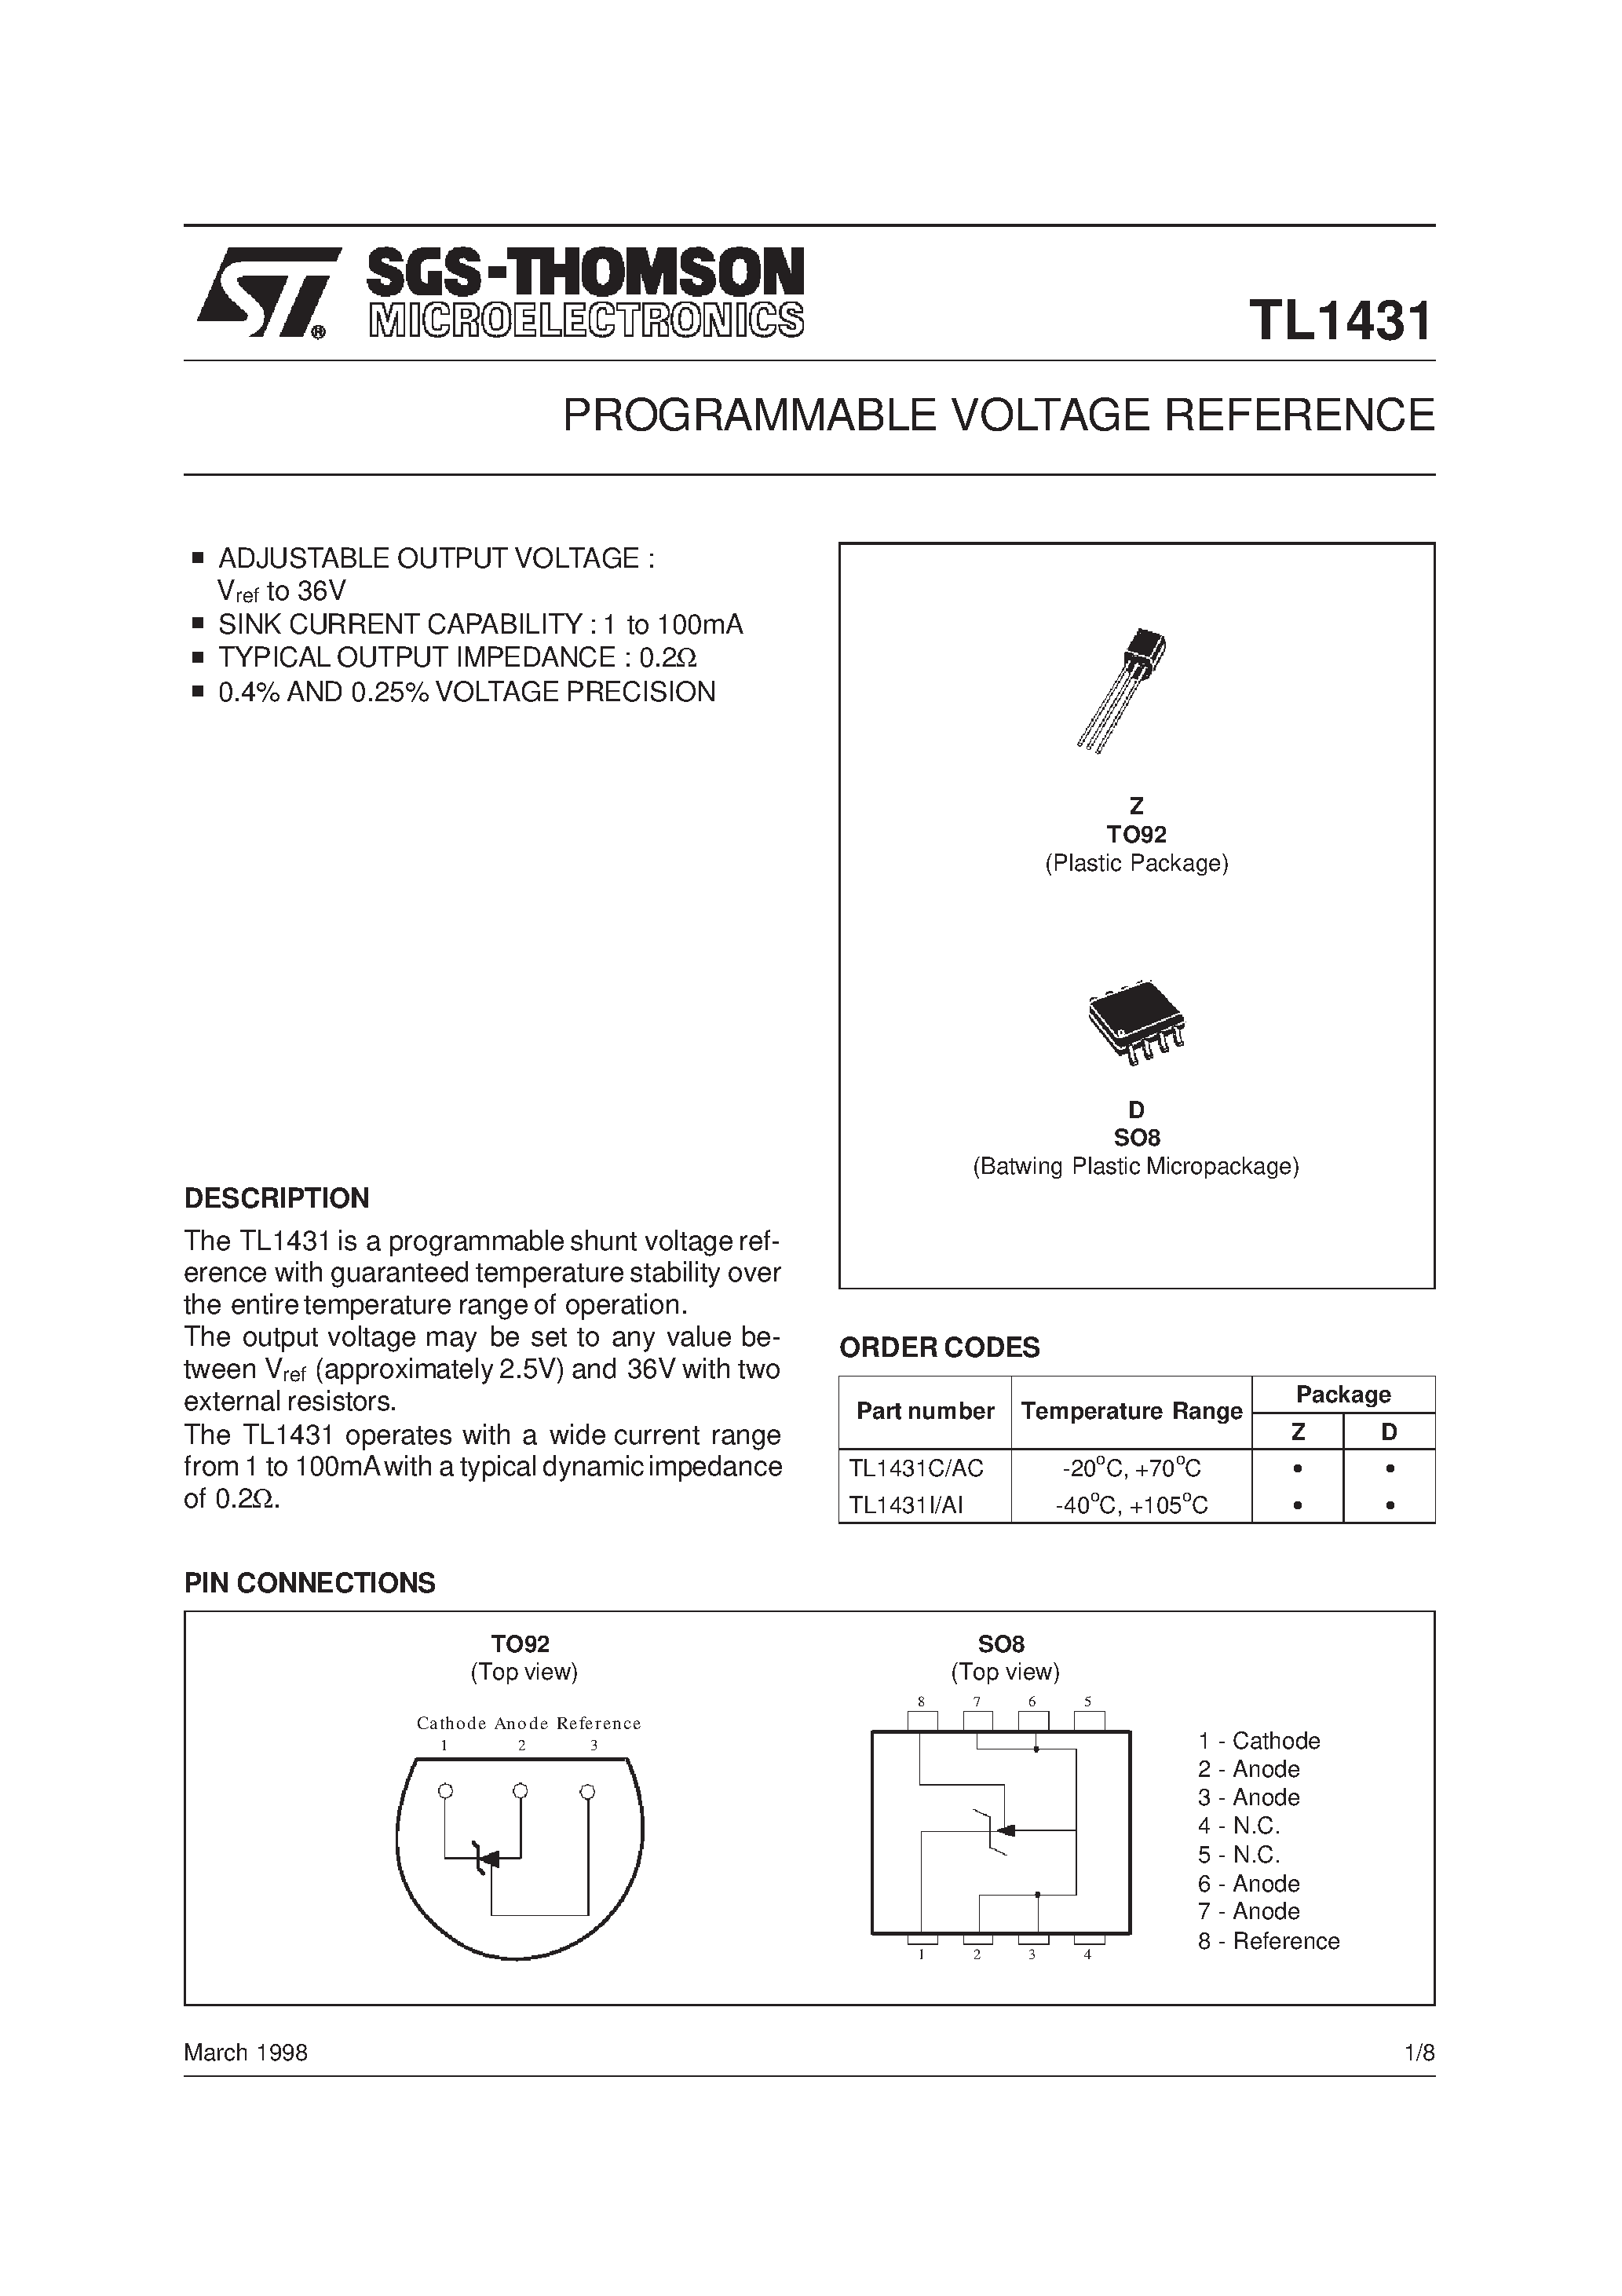 Даташит TL1431AC - PROGRAMMABLE VOLTAGE REFERENCE страница 1